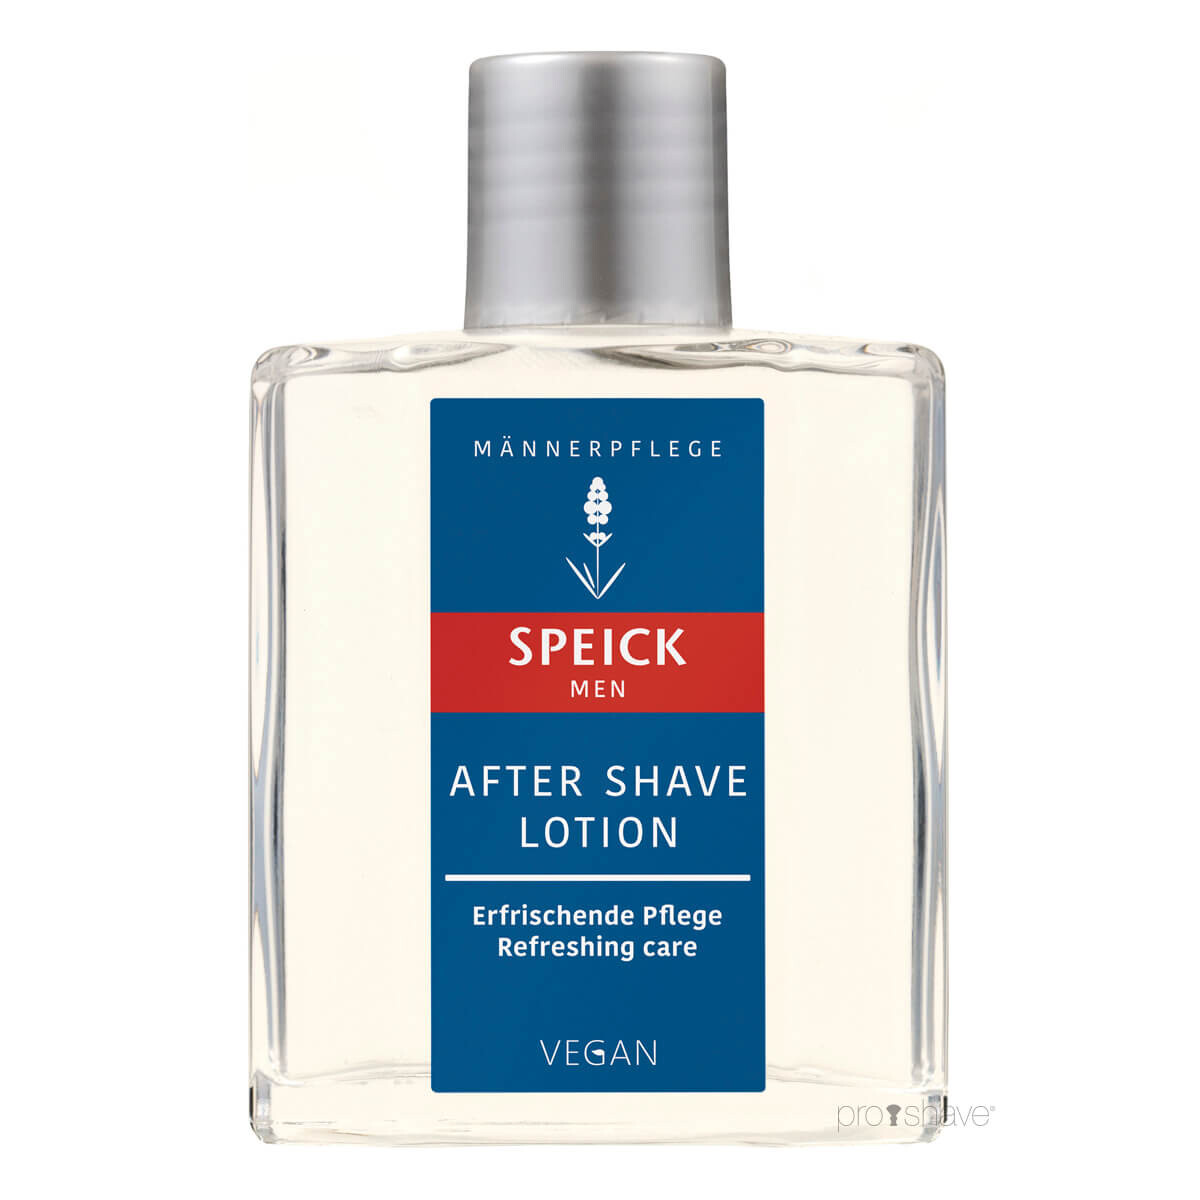 Speick Men Aftershave Lotion, 100 ml.